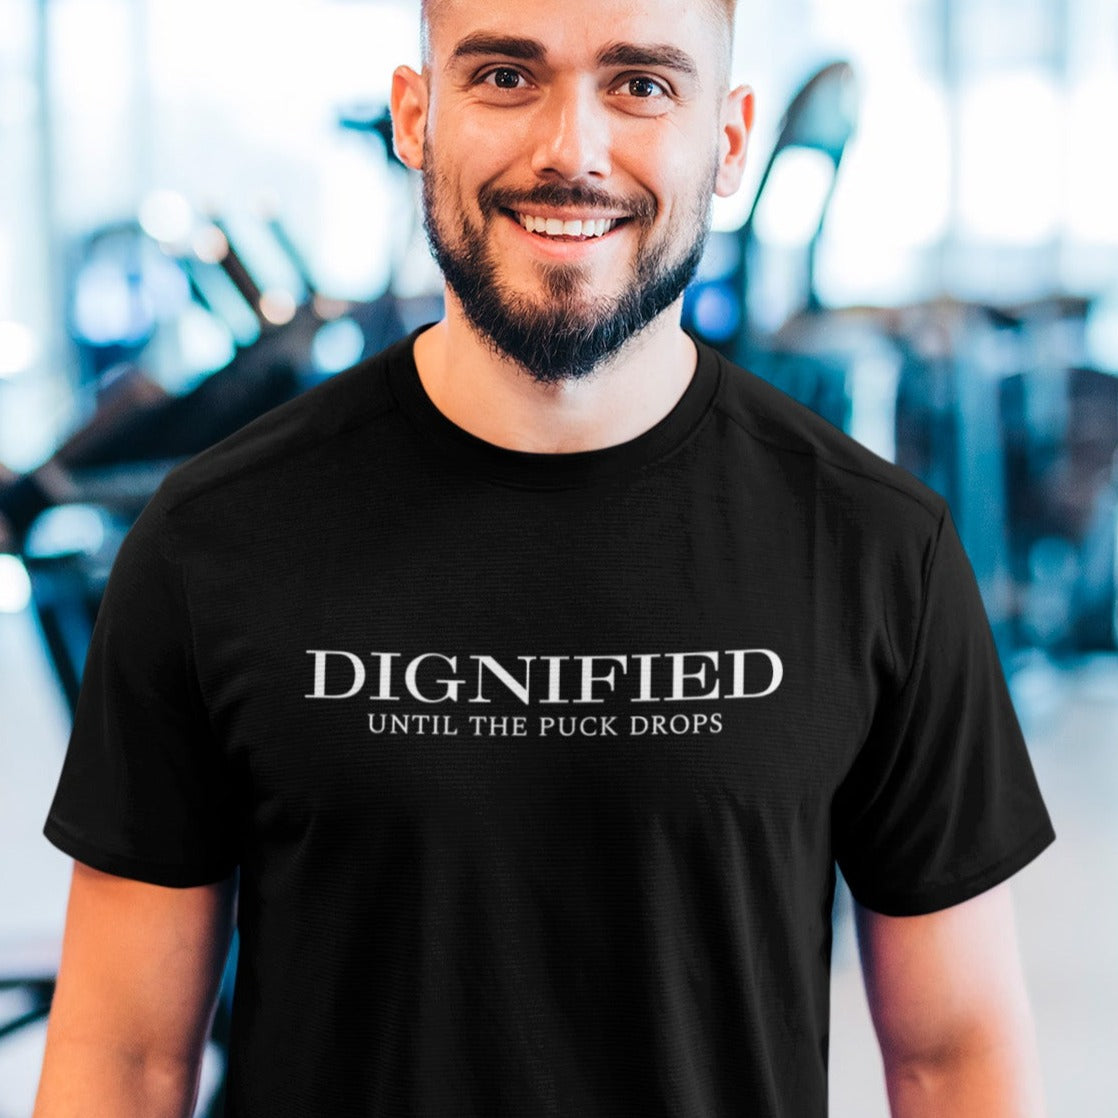 dignified-until-the-puck-drops-black-t-shirt-mens-sports-hockey-mockup-of-a-happy-man-at-the-gym